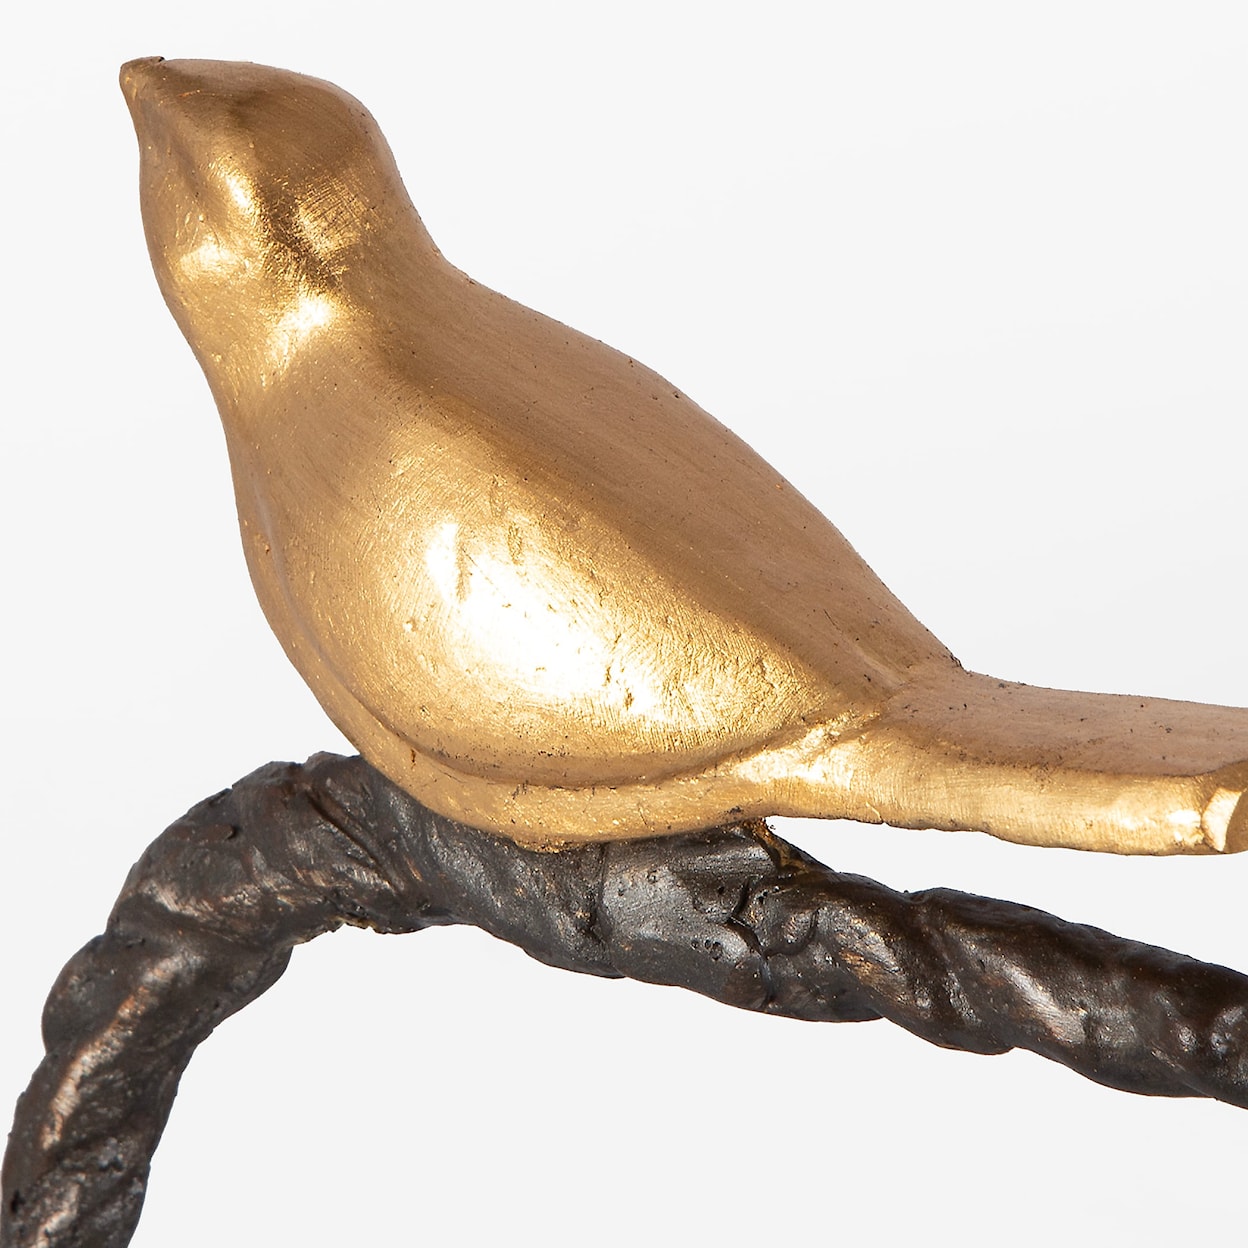 Uttermost Accessories - Statues and Figurines Birds on a Limb Sculpture